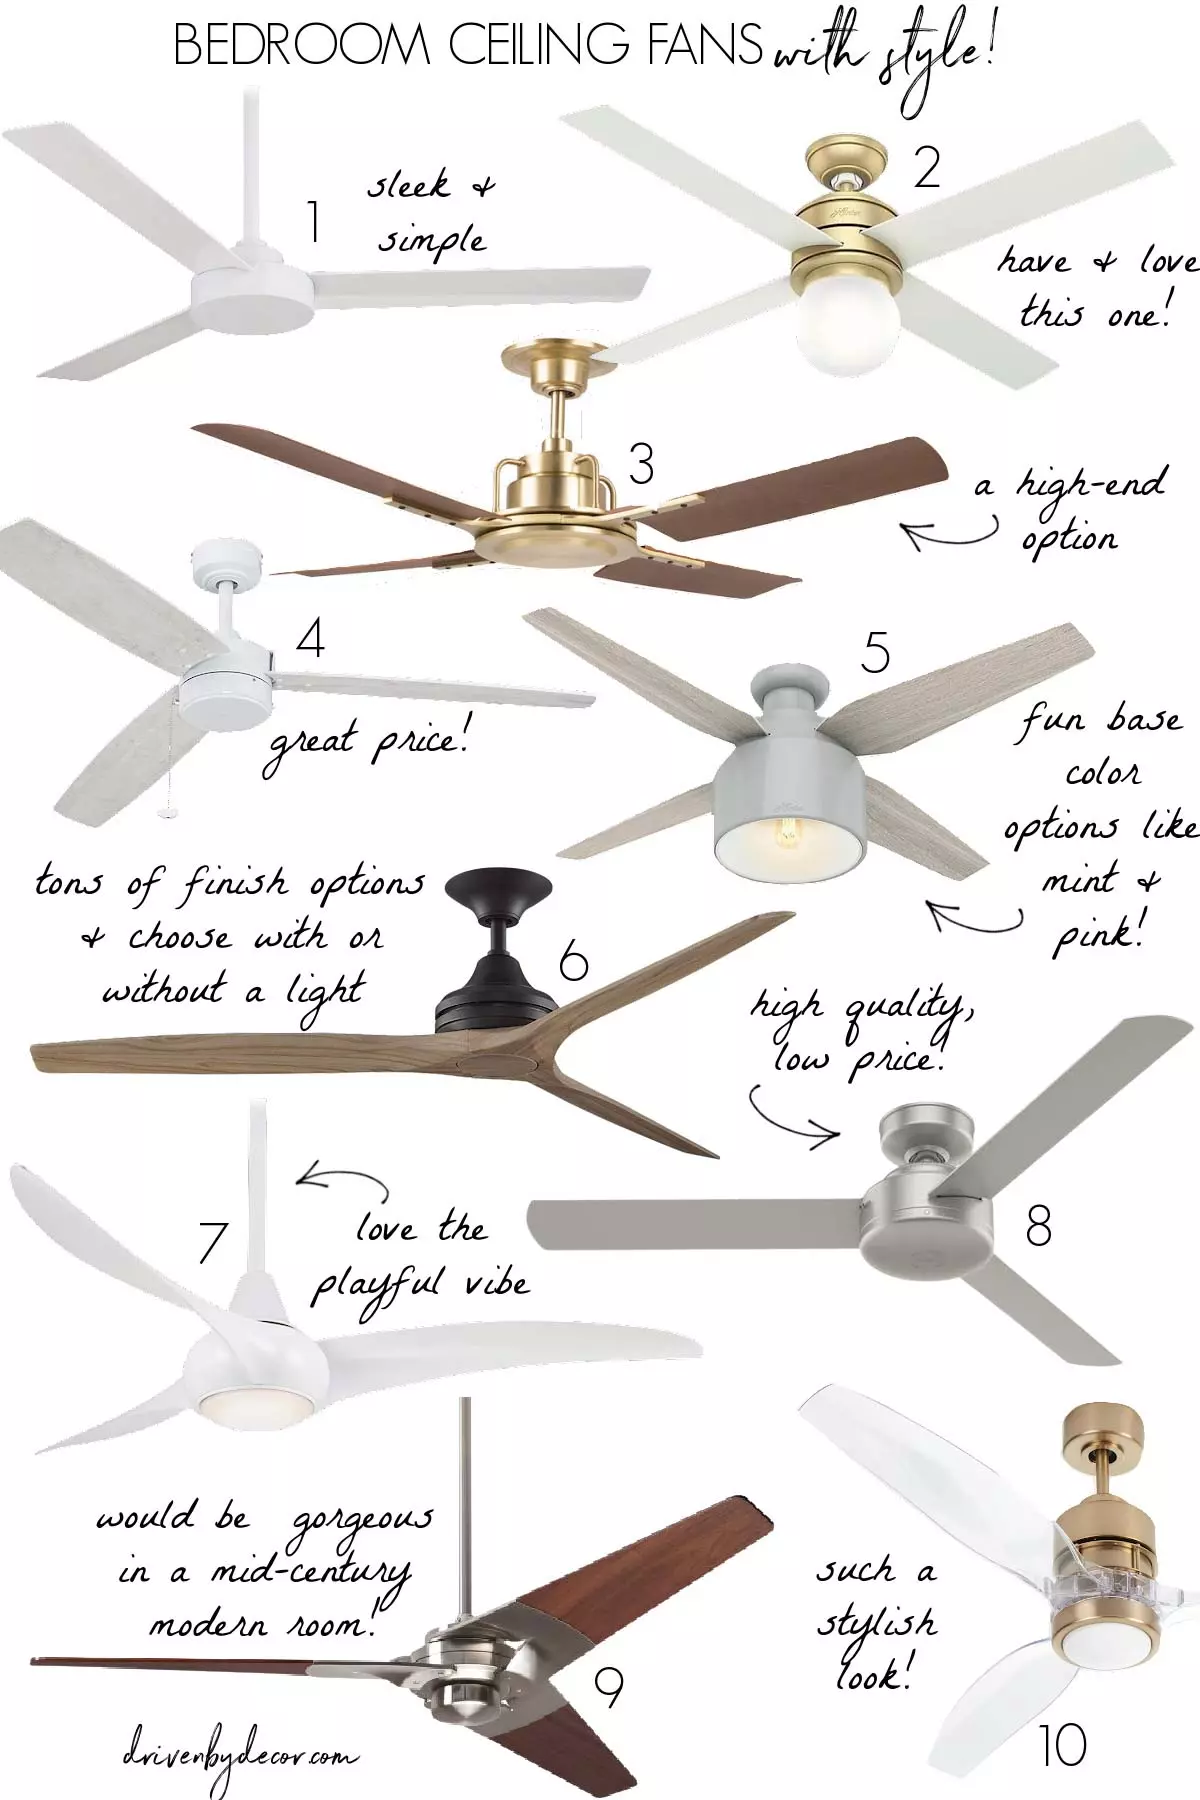 My favorite bedroom ceiling fans - all are so stylish!